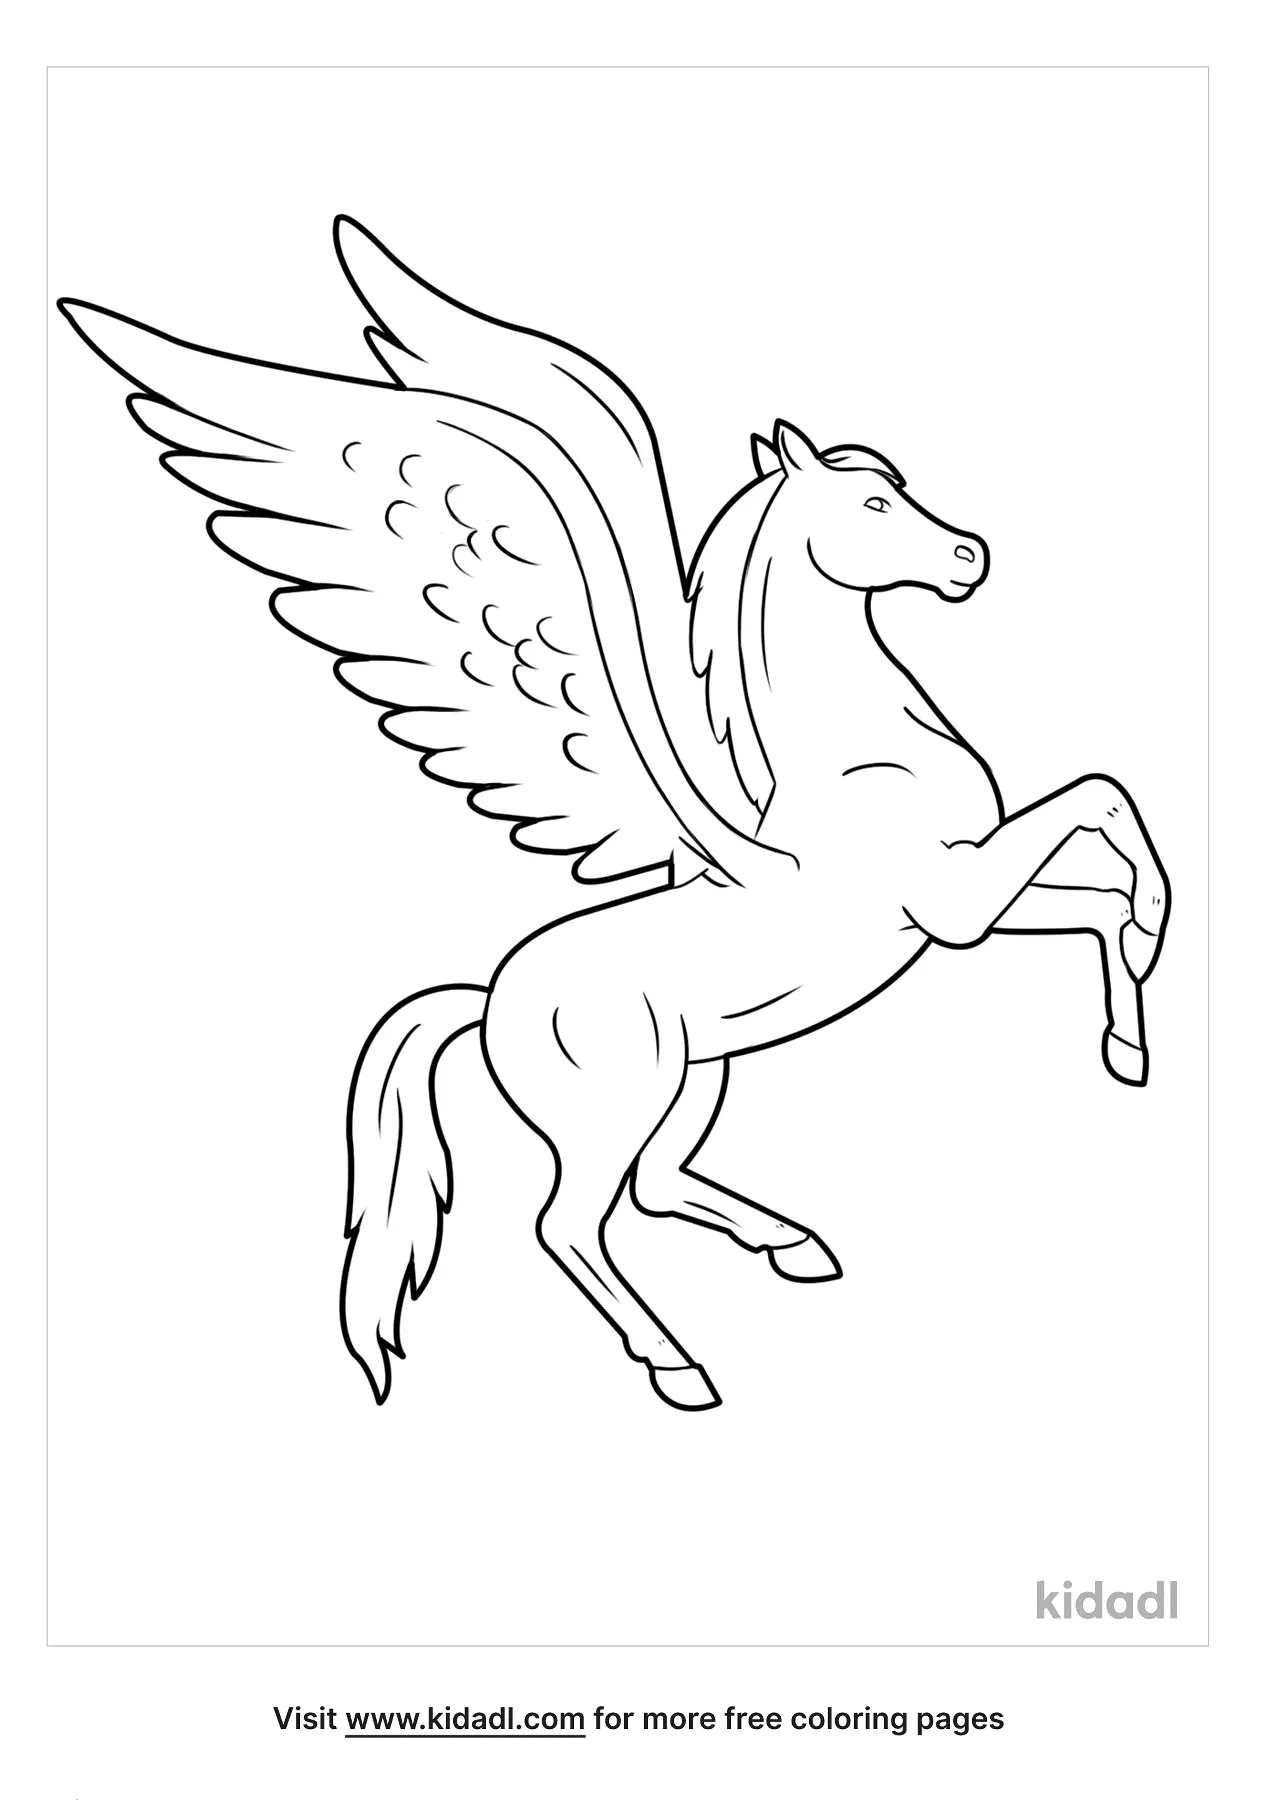 Pegasus Coloring Pages   Free Fantasy and characters Coloring ...